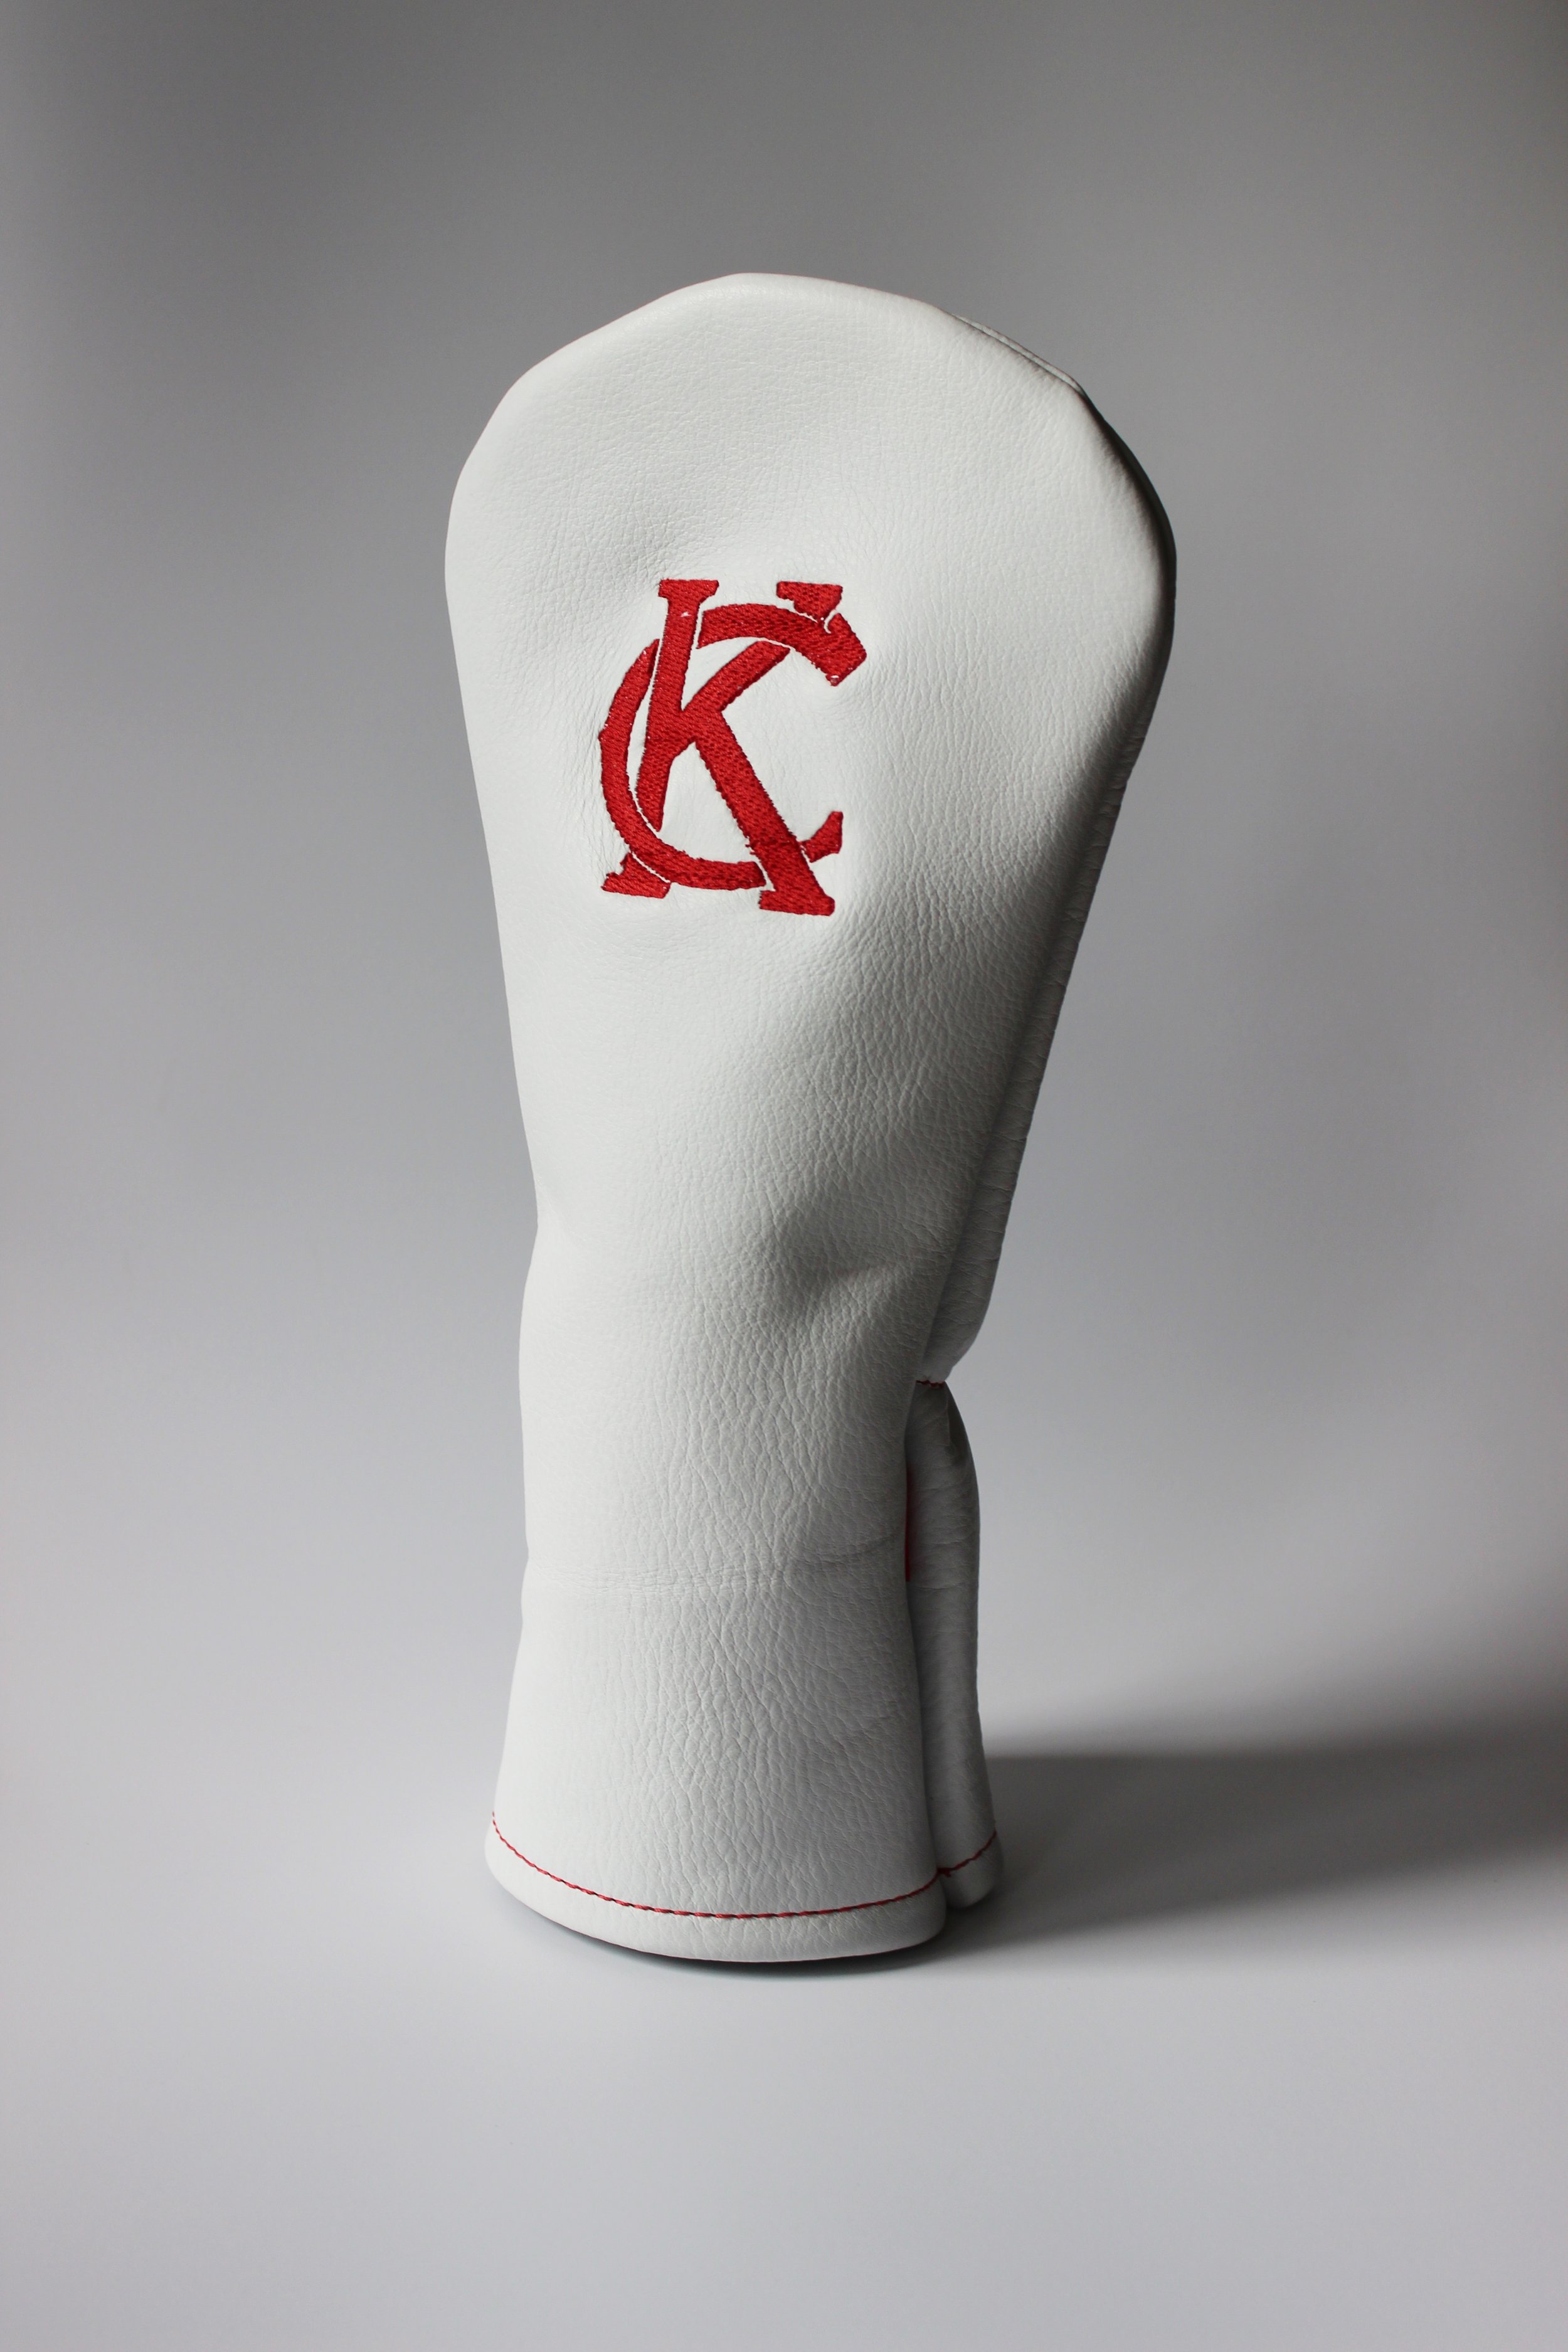 NH Leather KC Headcover – $86